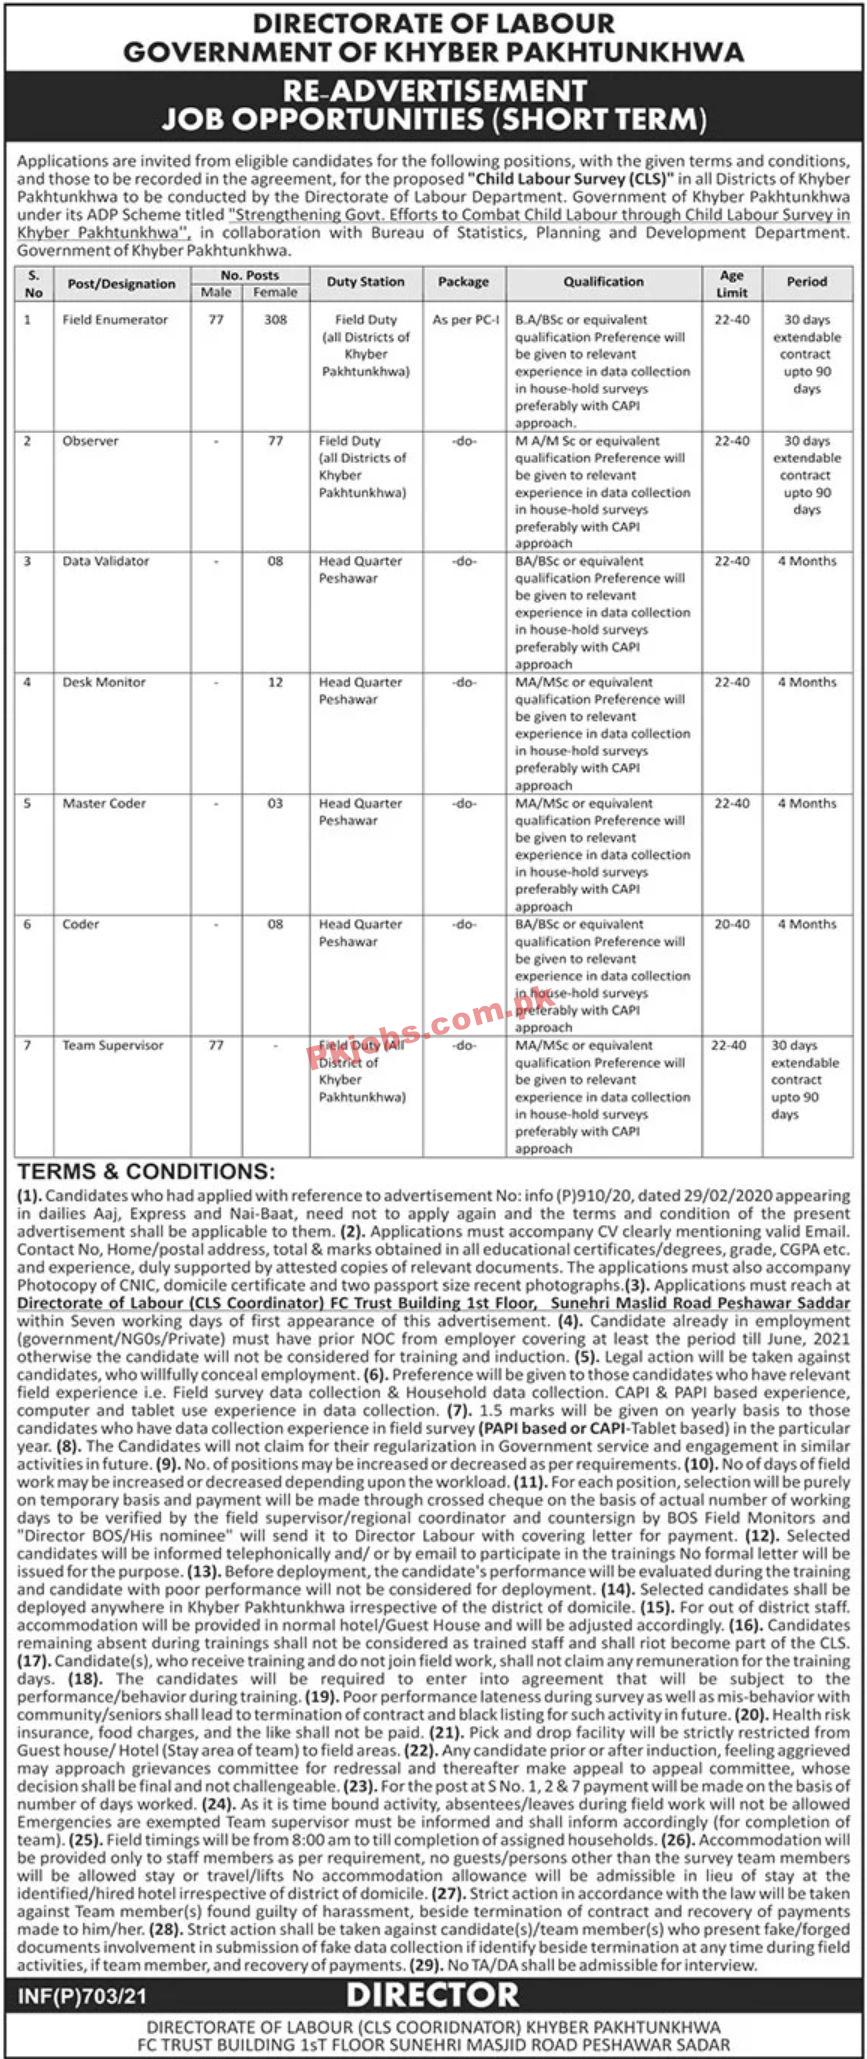 Jobs in Directorate of Labour Government of Khyber Pakhtunkhwa